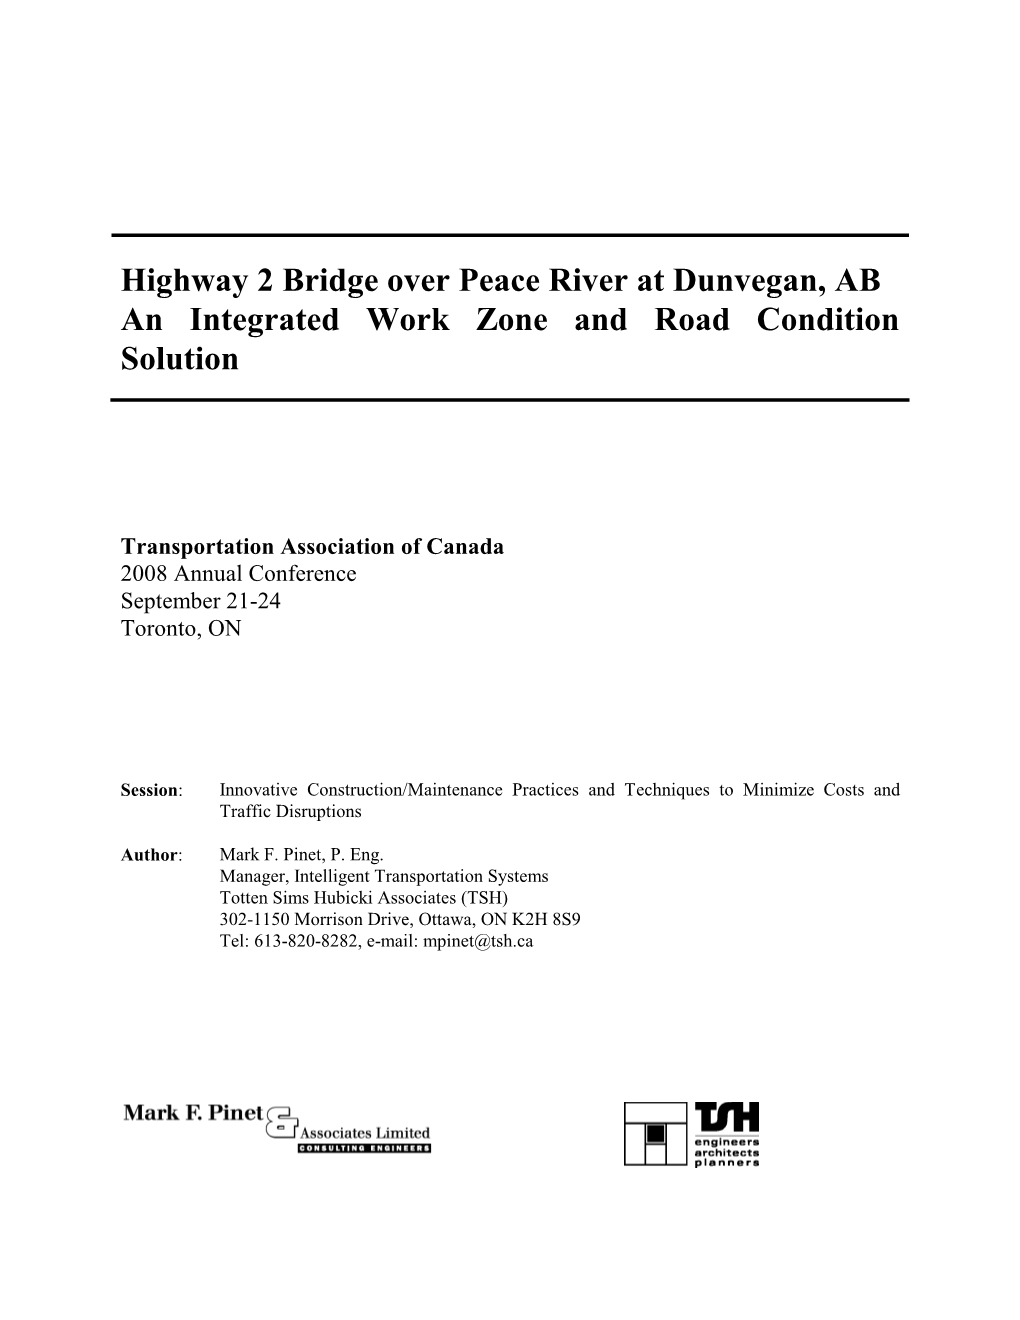 Highway 2 Bridge Over Peace River at Dunvegan, AB an Integrated Work Zone and Road Condition Solution